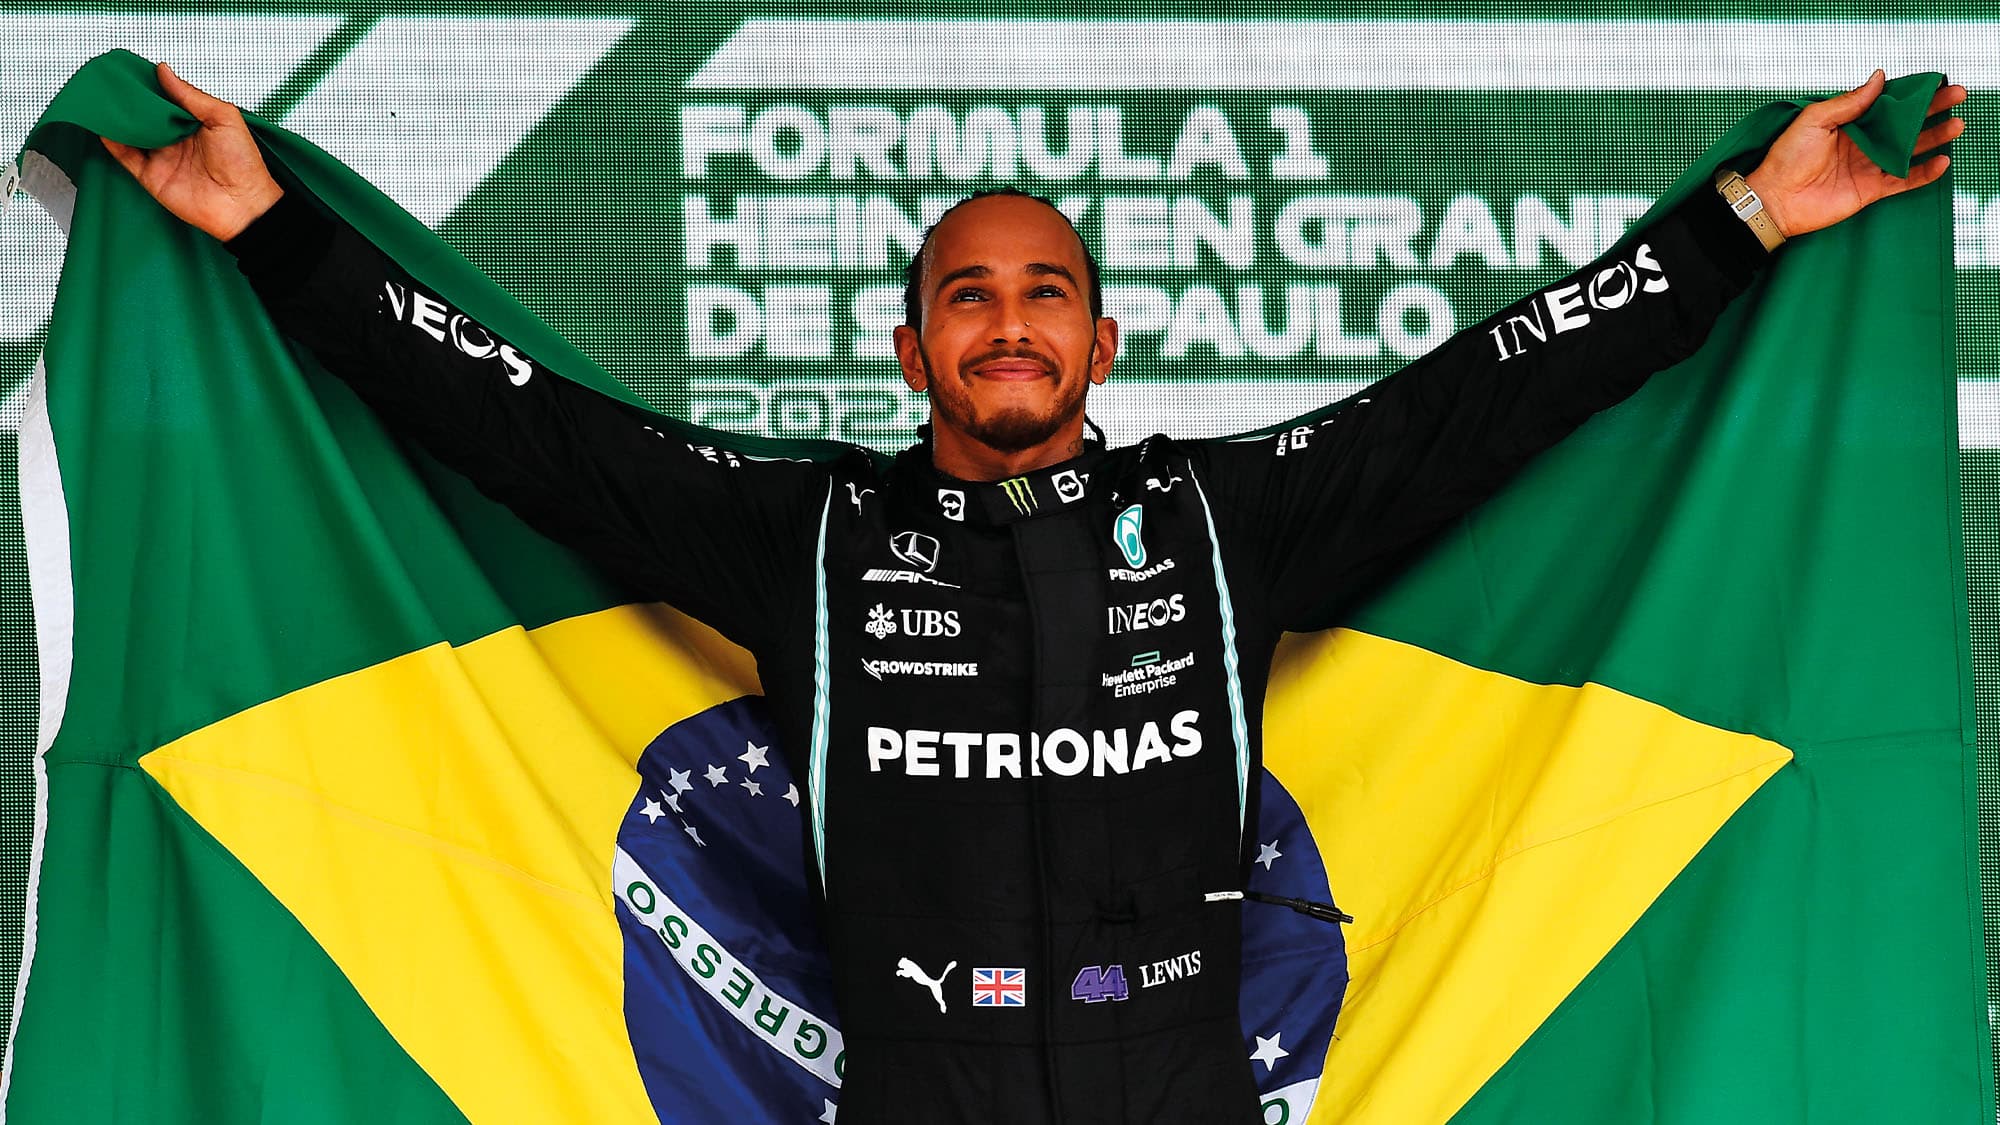 Lewis Hamilton with flag of Brazil after winning the grand prix at Interlagos